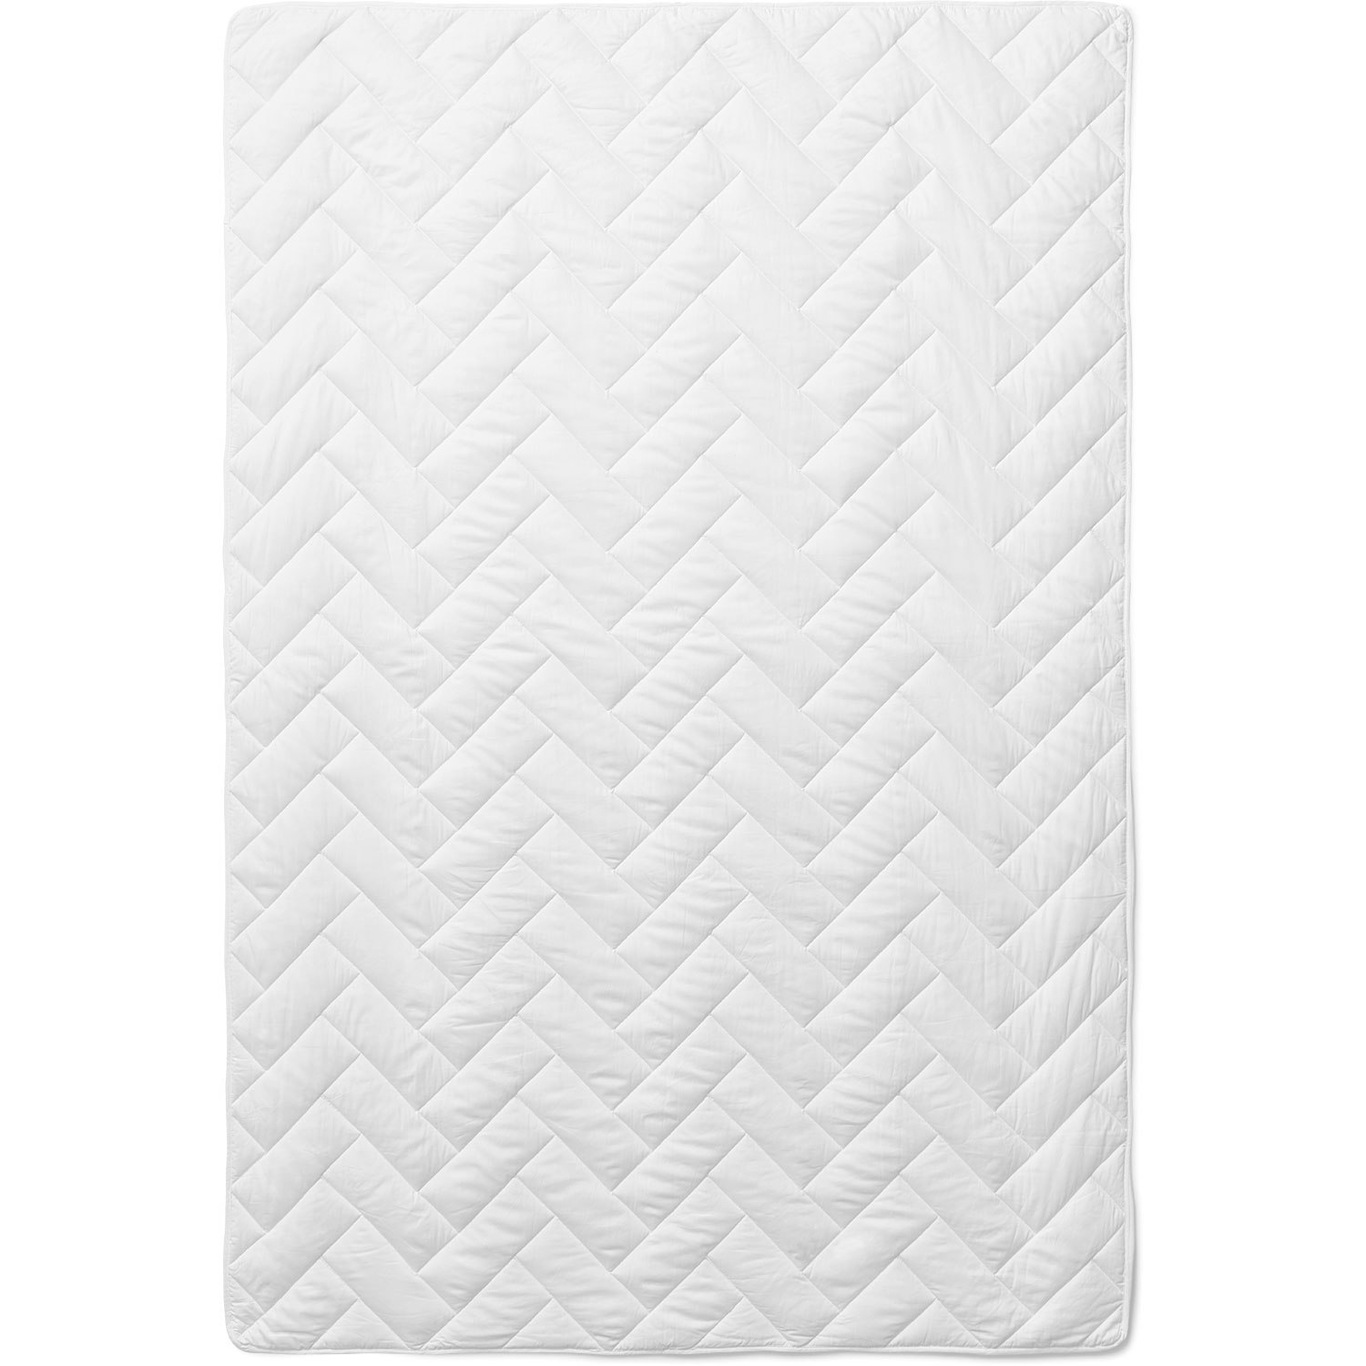 Pearl 7 kg Weighted Blanket 150x210 cm, White - Cura of Sweden @ RoyalDesign